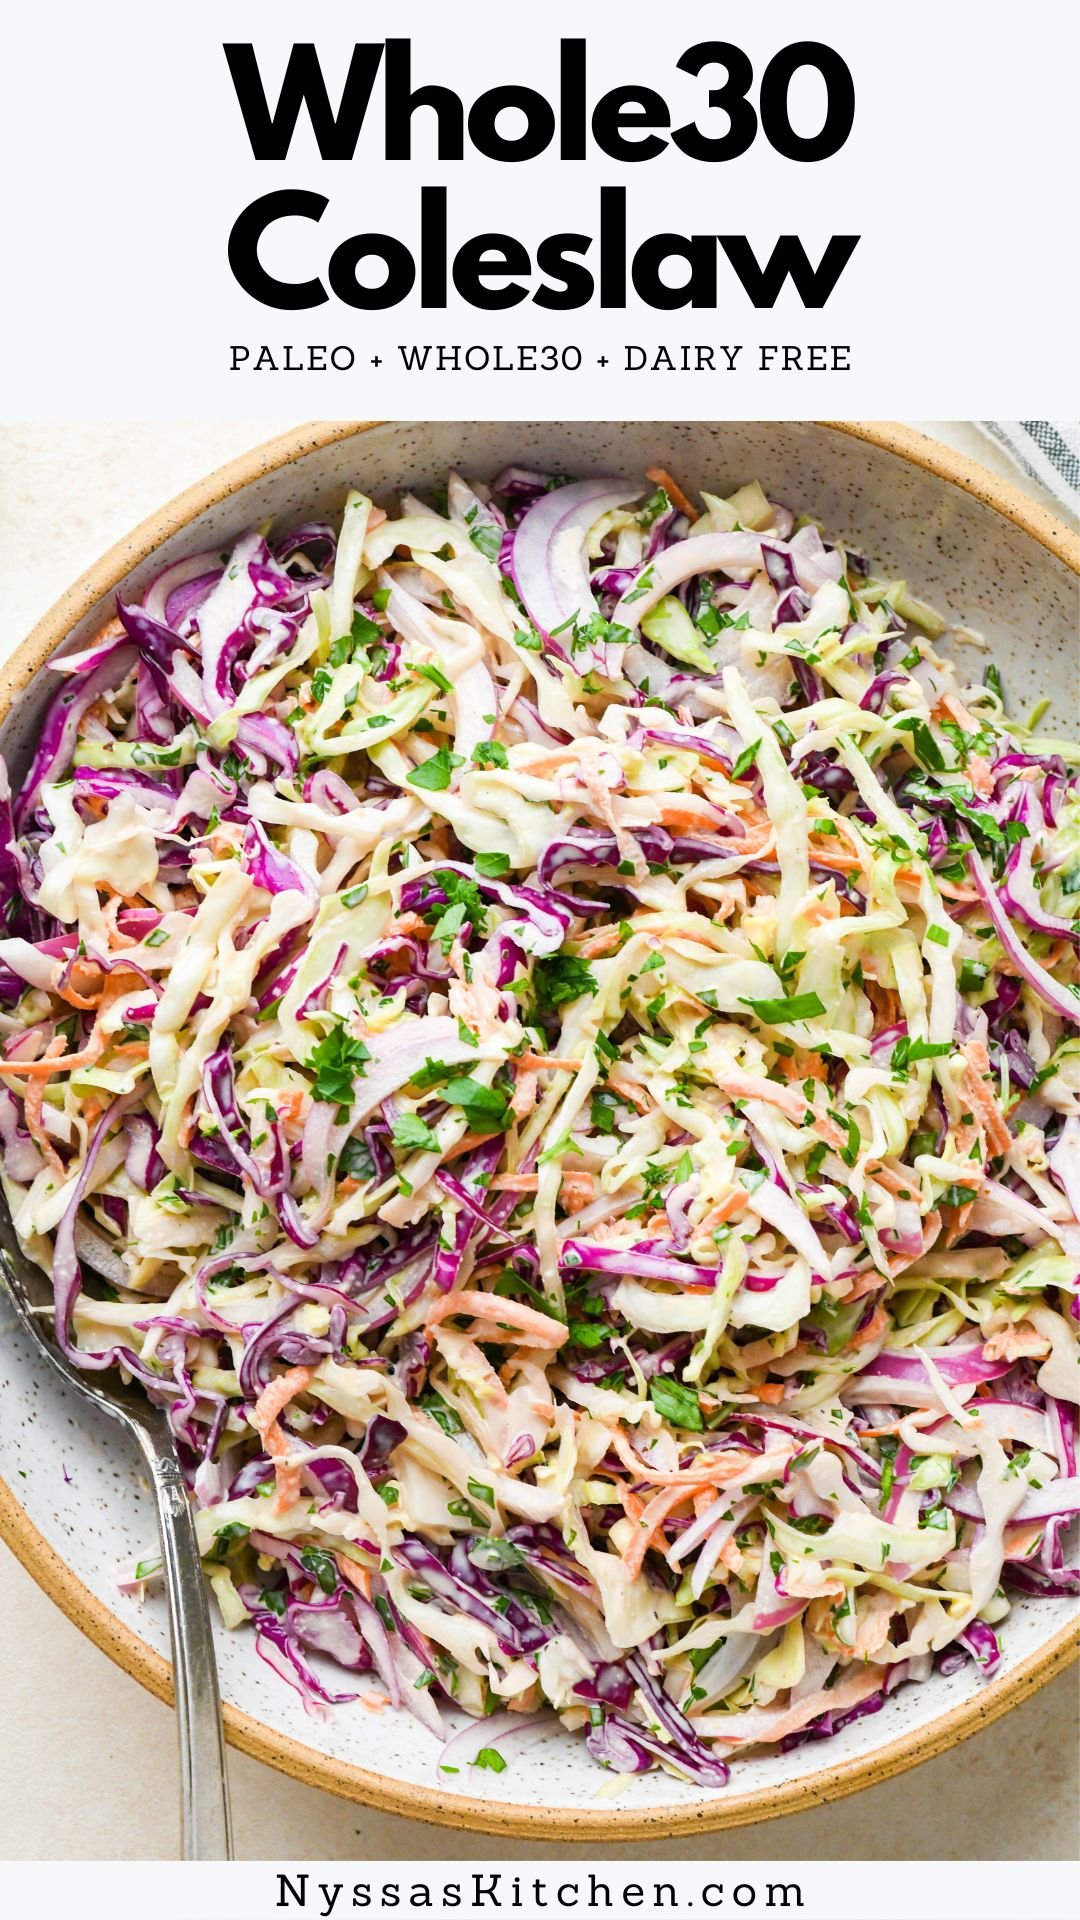 This Whole30 coleslaw is made with fresh and crunchy cabbage, carrots, herbs, and a creamy, tangy dressing. All the flavors you love in a traditional coleslaw recipe without any of the sugar! The perfect side dish for your next BBQ, potluck, or family dinner. Whole30, paleo, gluten free, dairy free, vegan option.